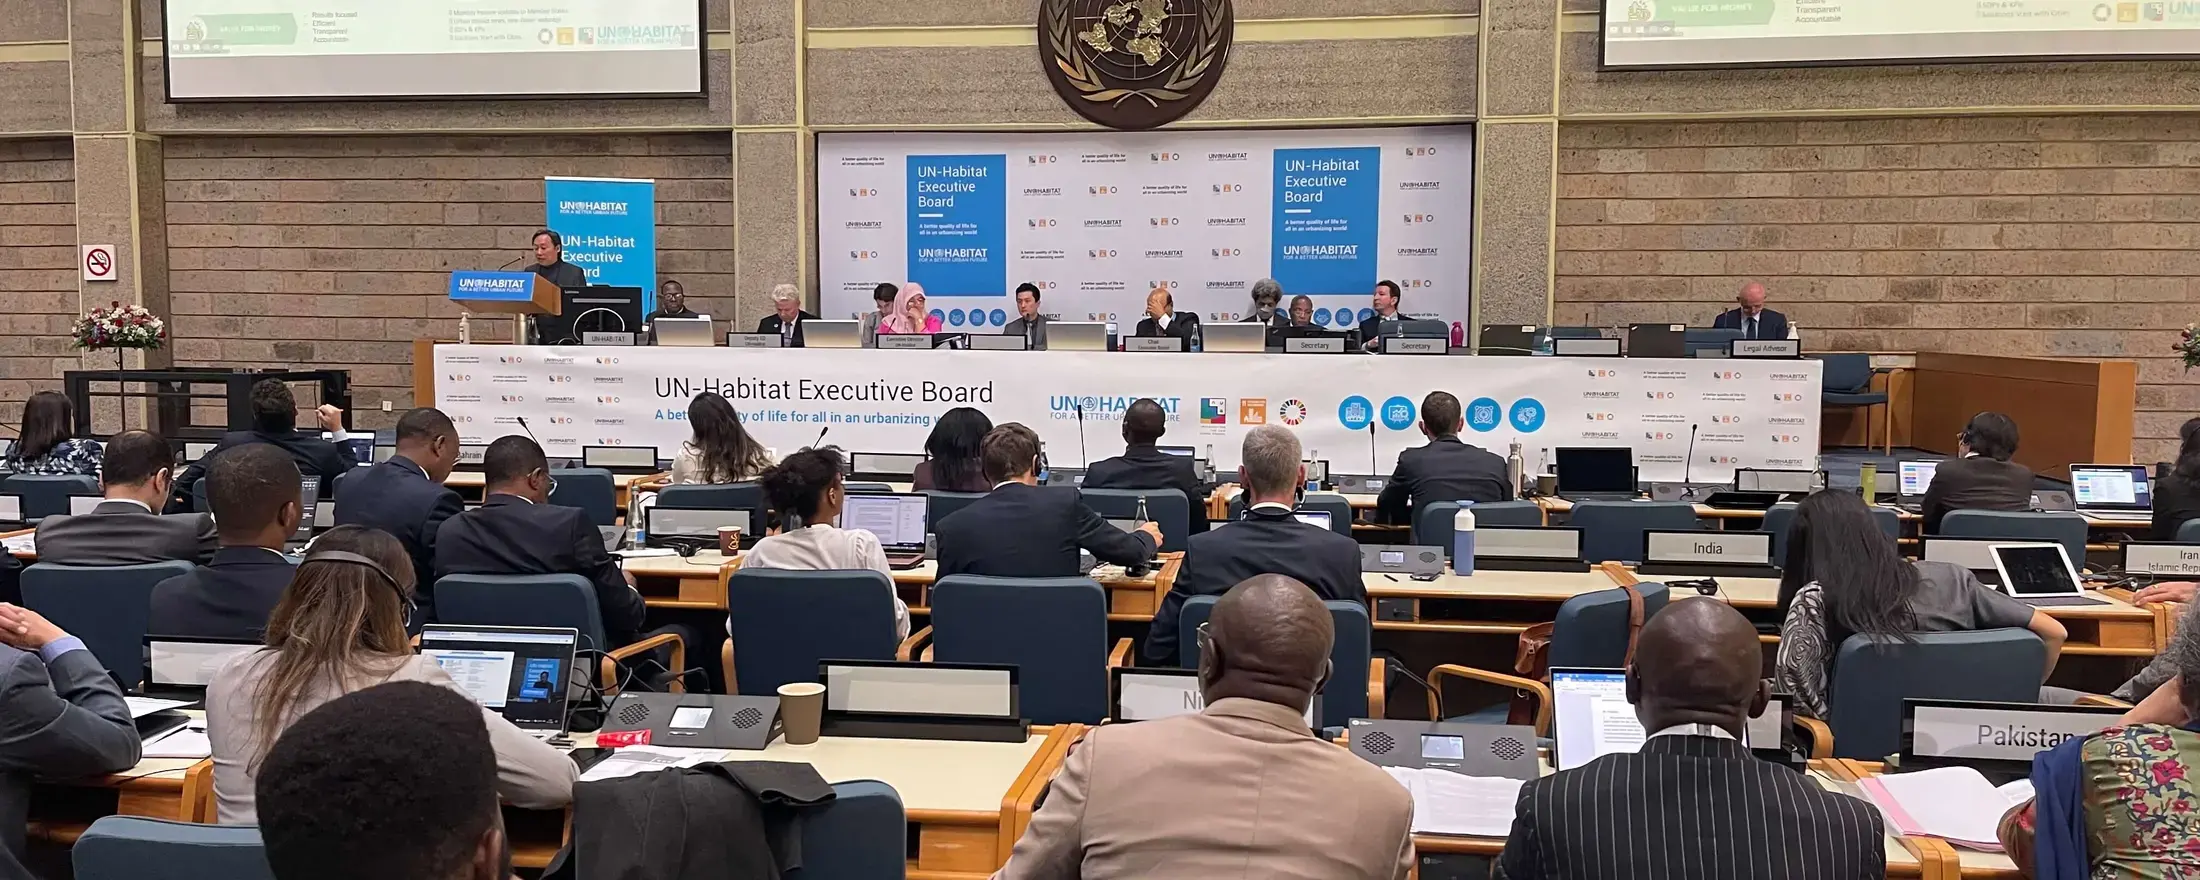 Member states gather in Nairobi for the second session of the UN-Habitat Executive Board